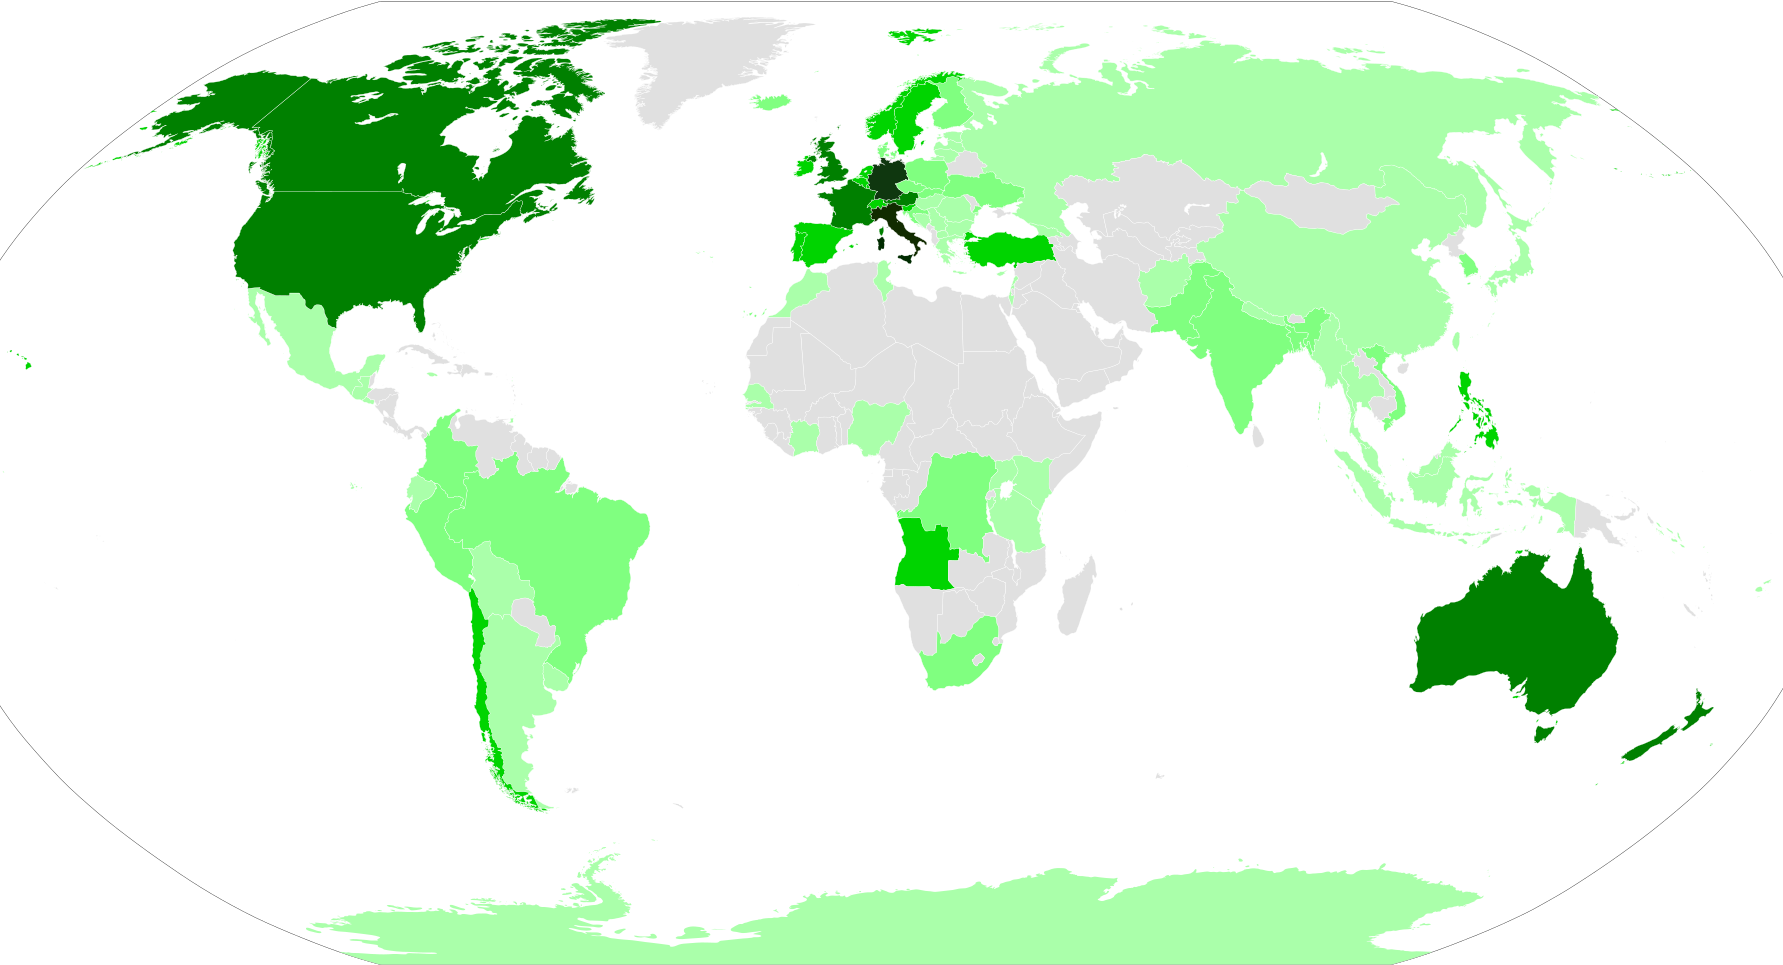 Map of the world showing climate youth strikes